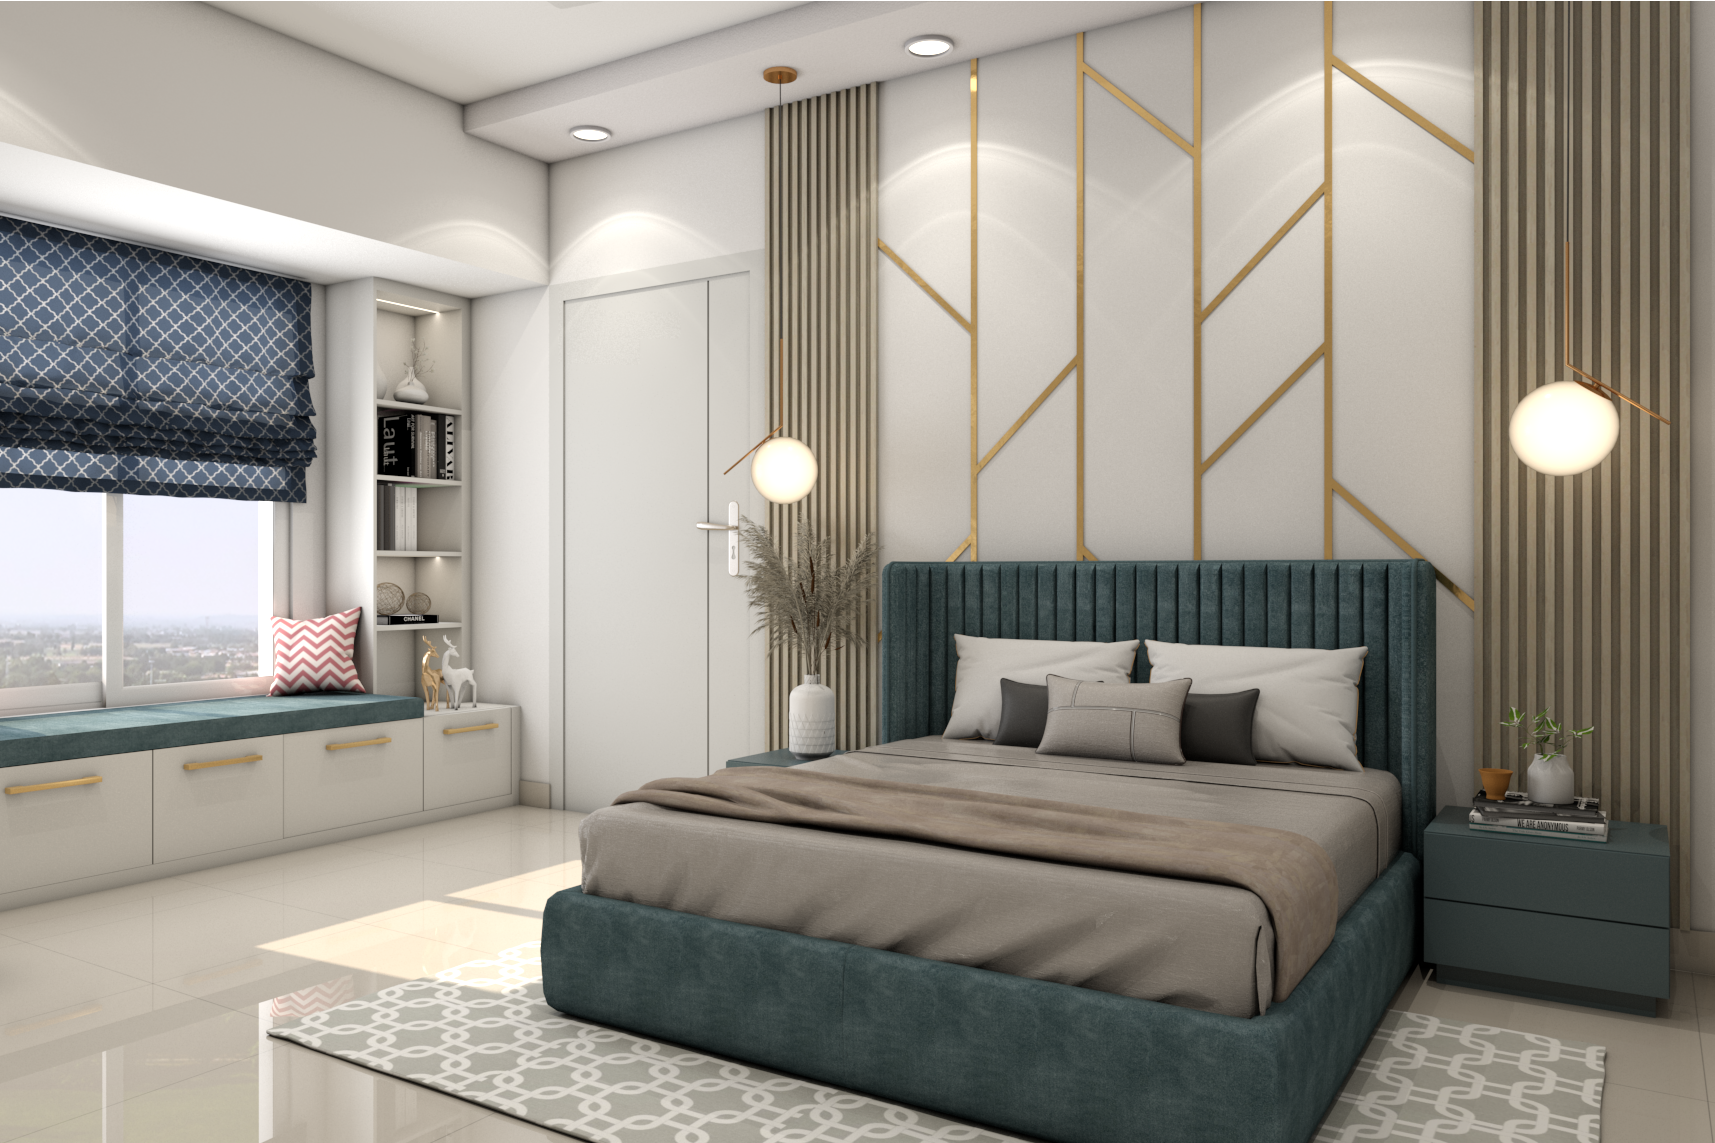 Contemporary Spacious Master Bedroom Design With Accent Wall